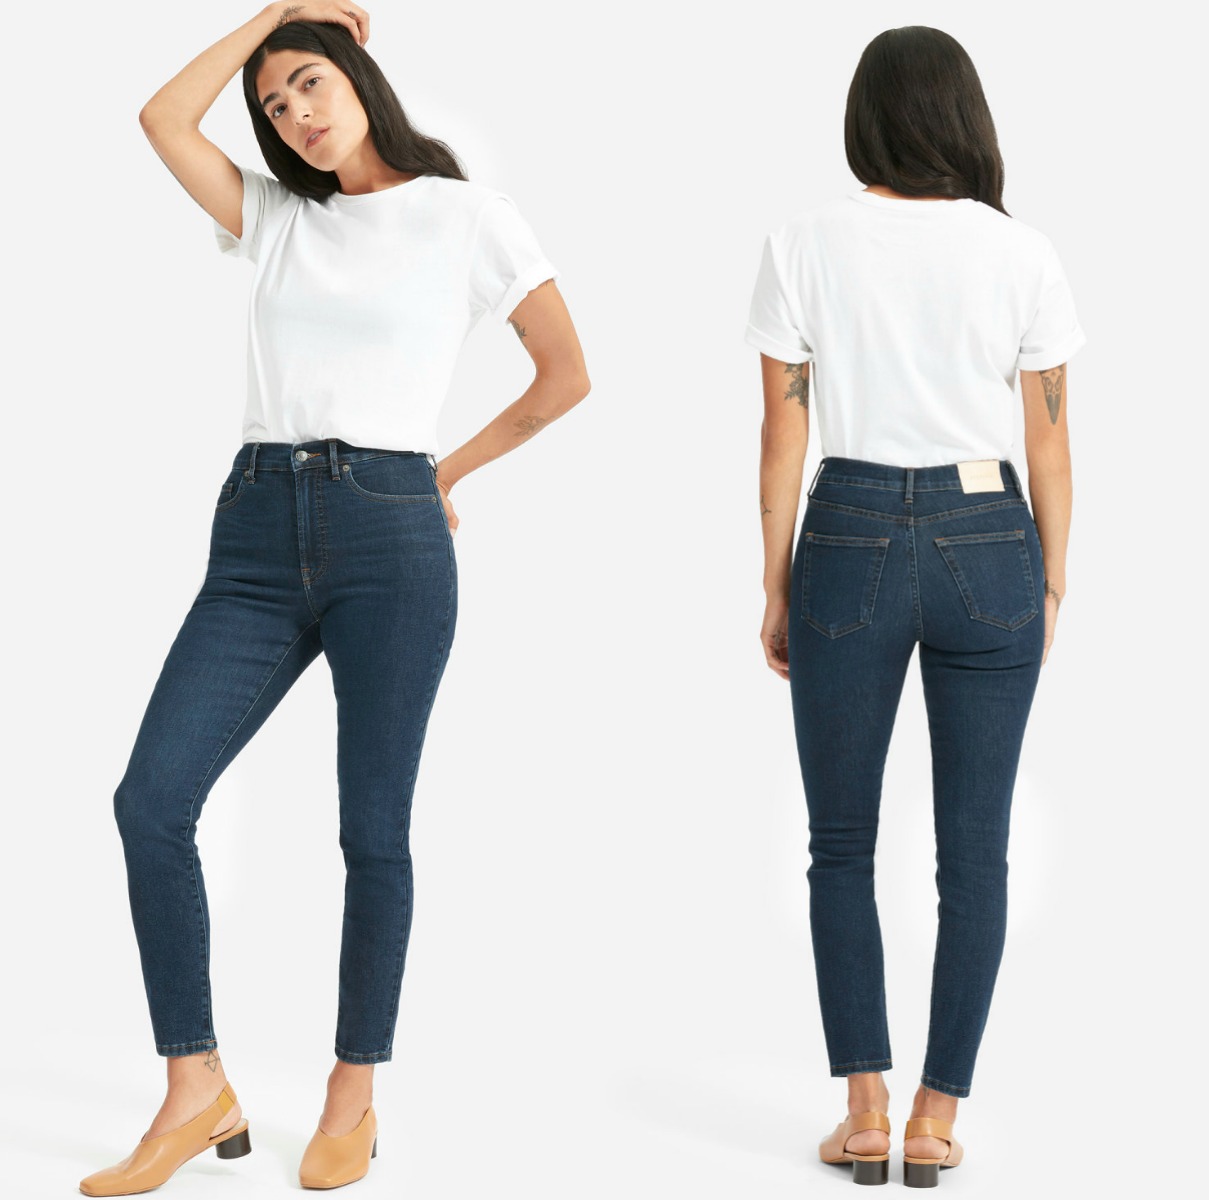 EVERLANE AUTHENTIC STRETCH HIGH-RISE SKINNY JEANS [ON SALE] - LIFE